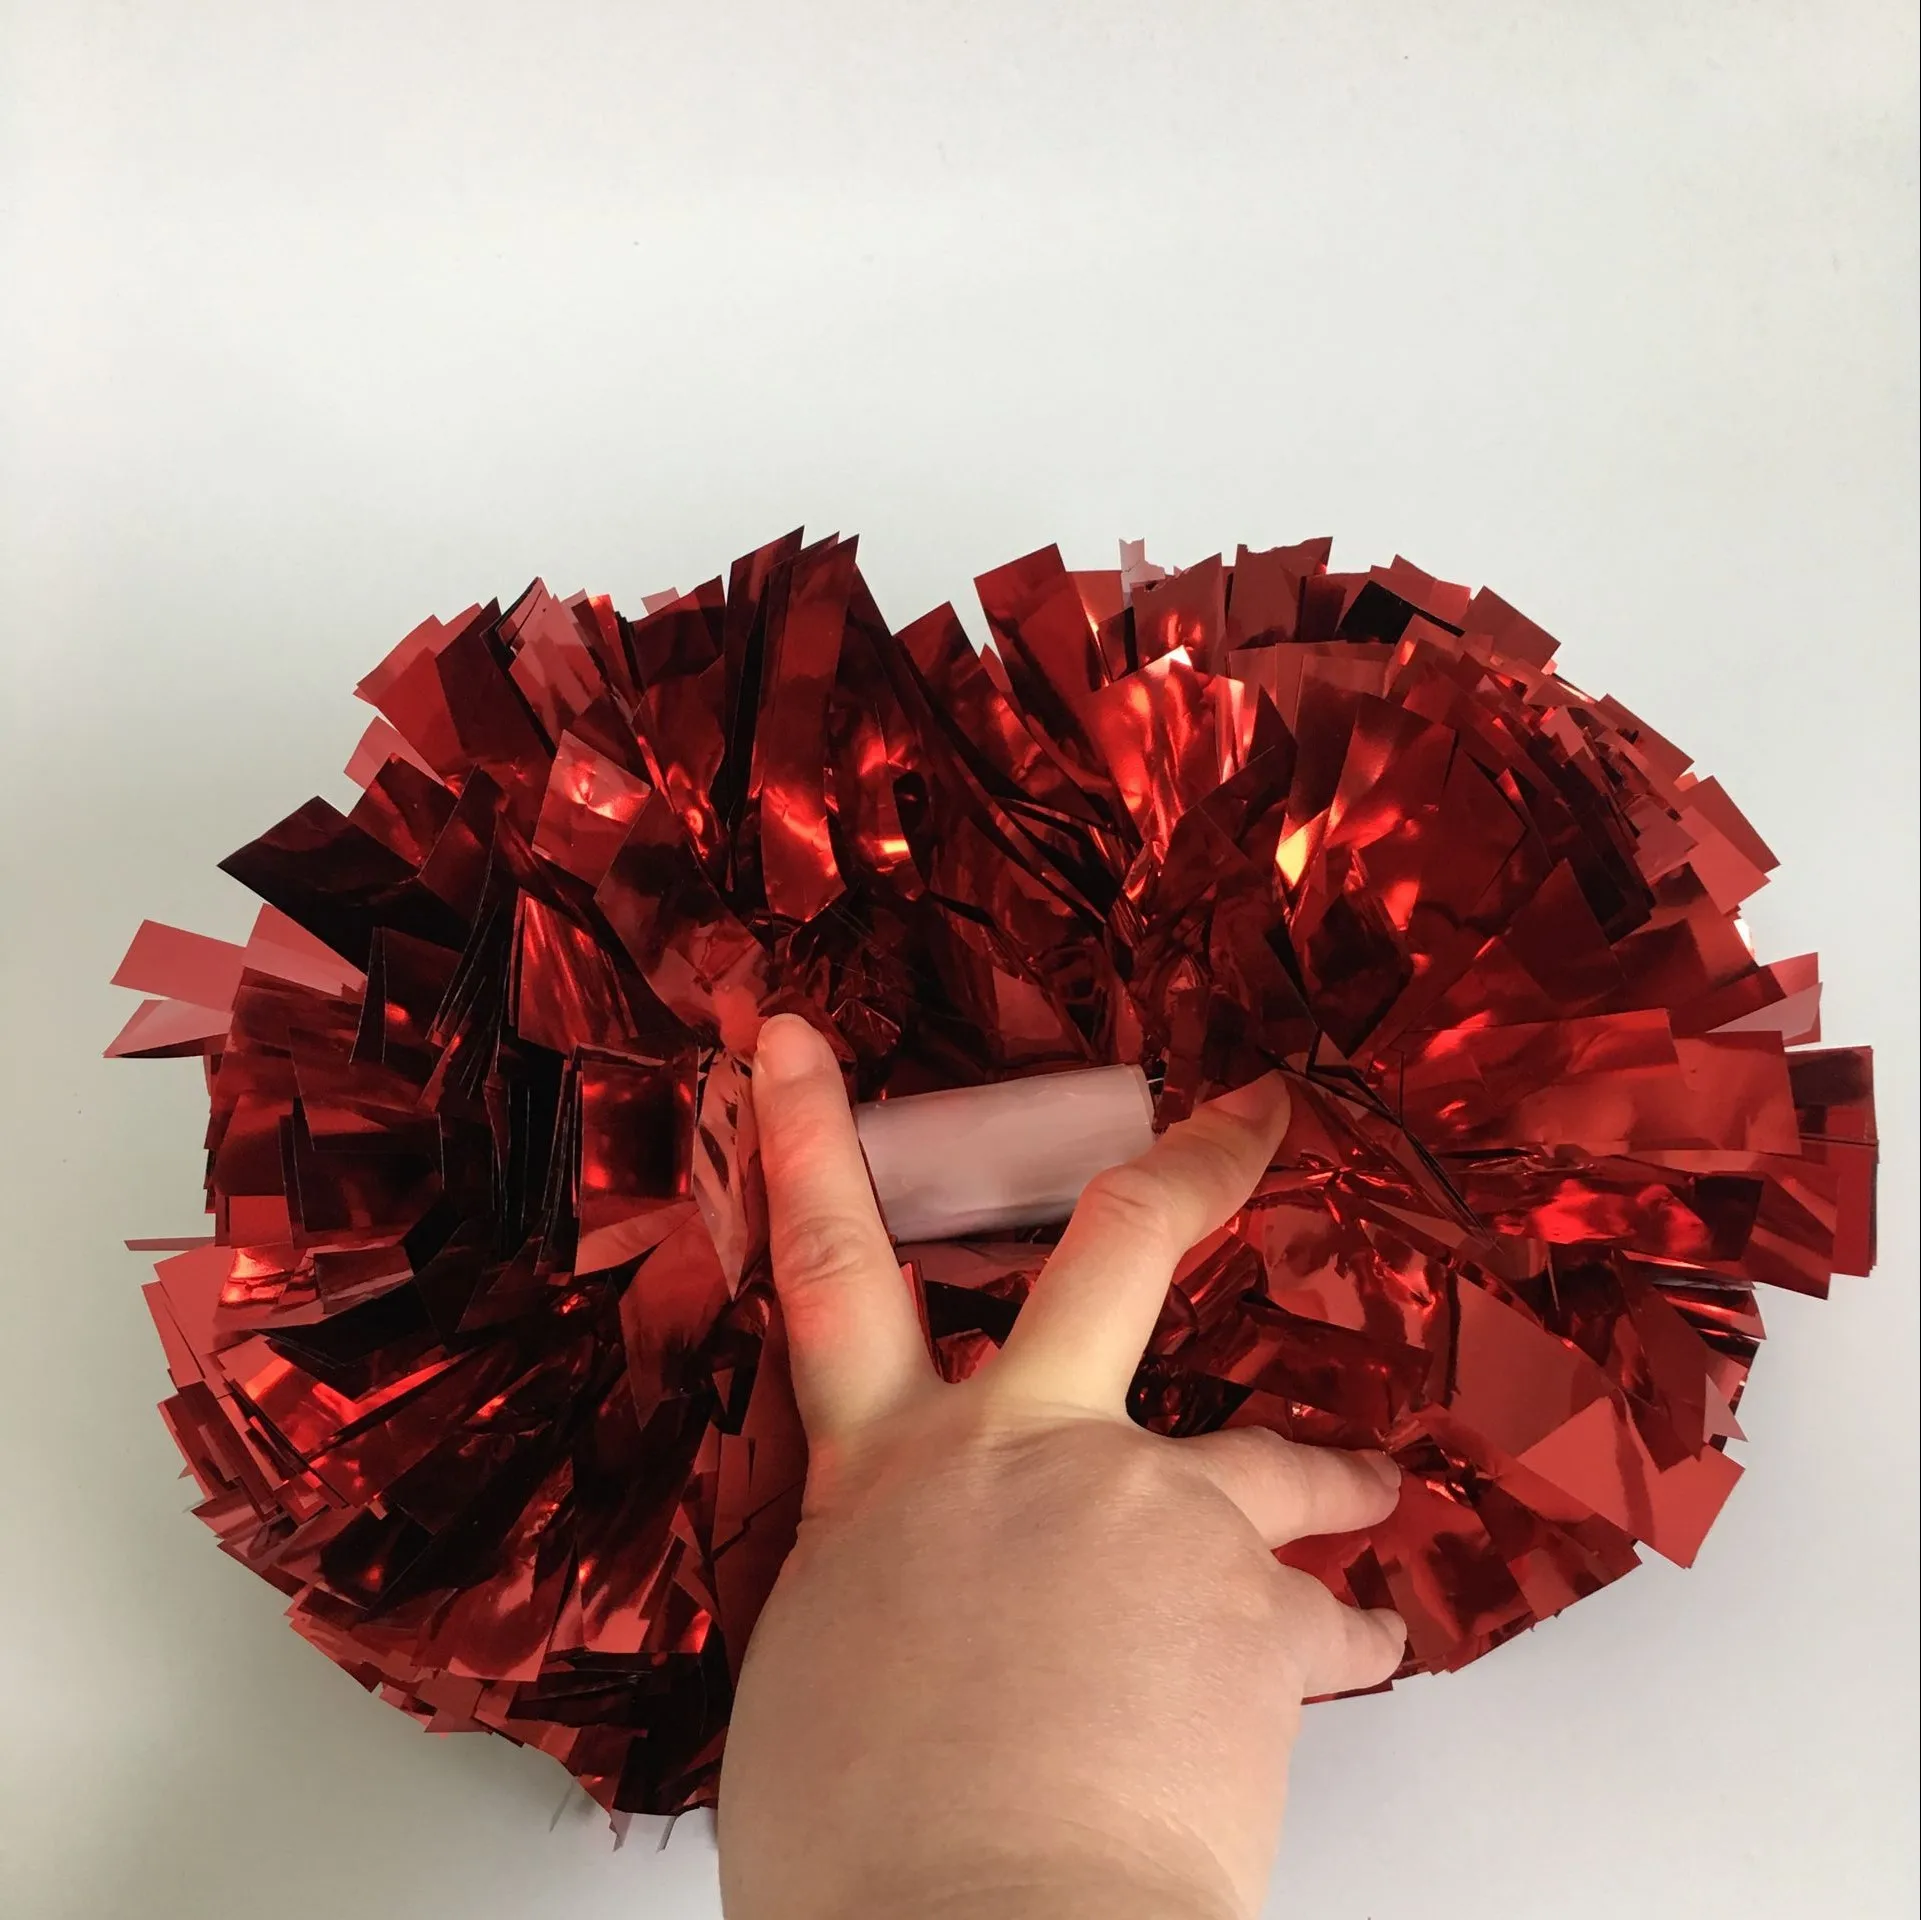 1000 Streamers 4 Inch With Baton Handle Red Metallic Cheerleading Pom Poms - Buy Cheerleading Pom Poms,Metallic Pom Poms,Pom Cheerleading Product on Alibaba.com